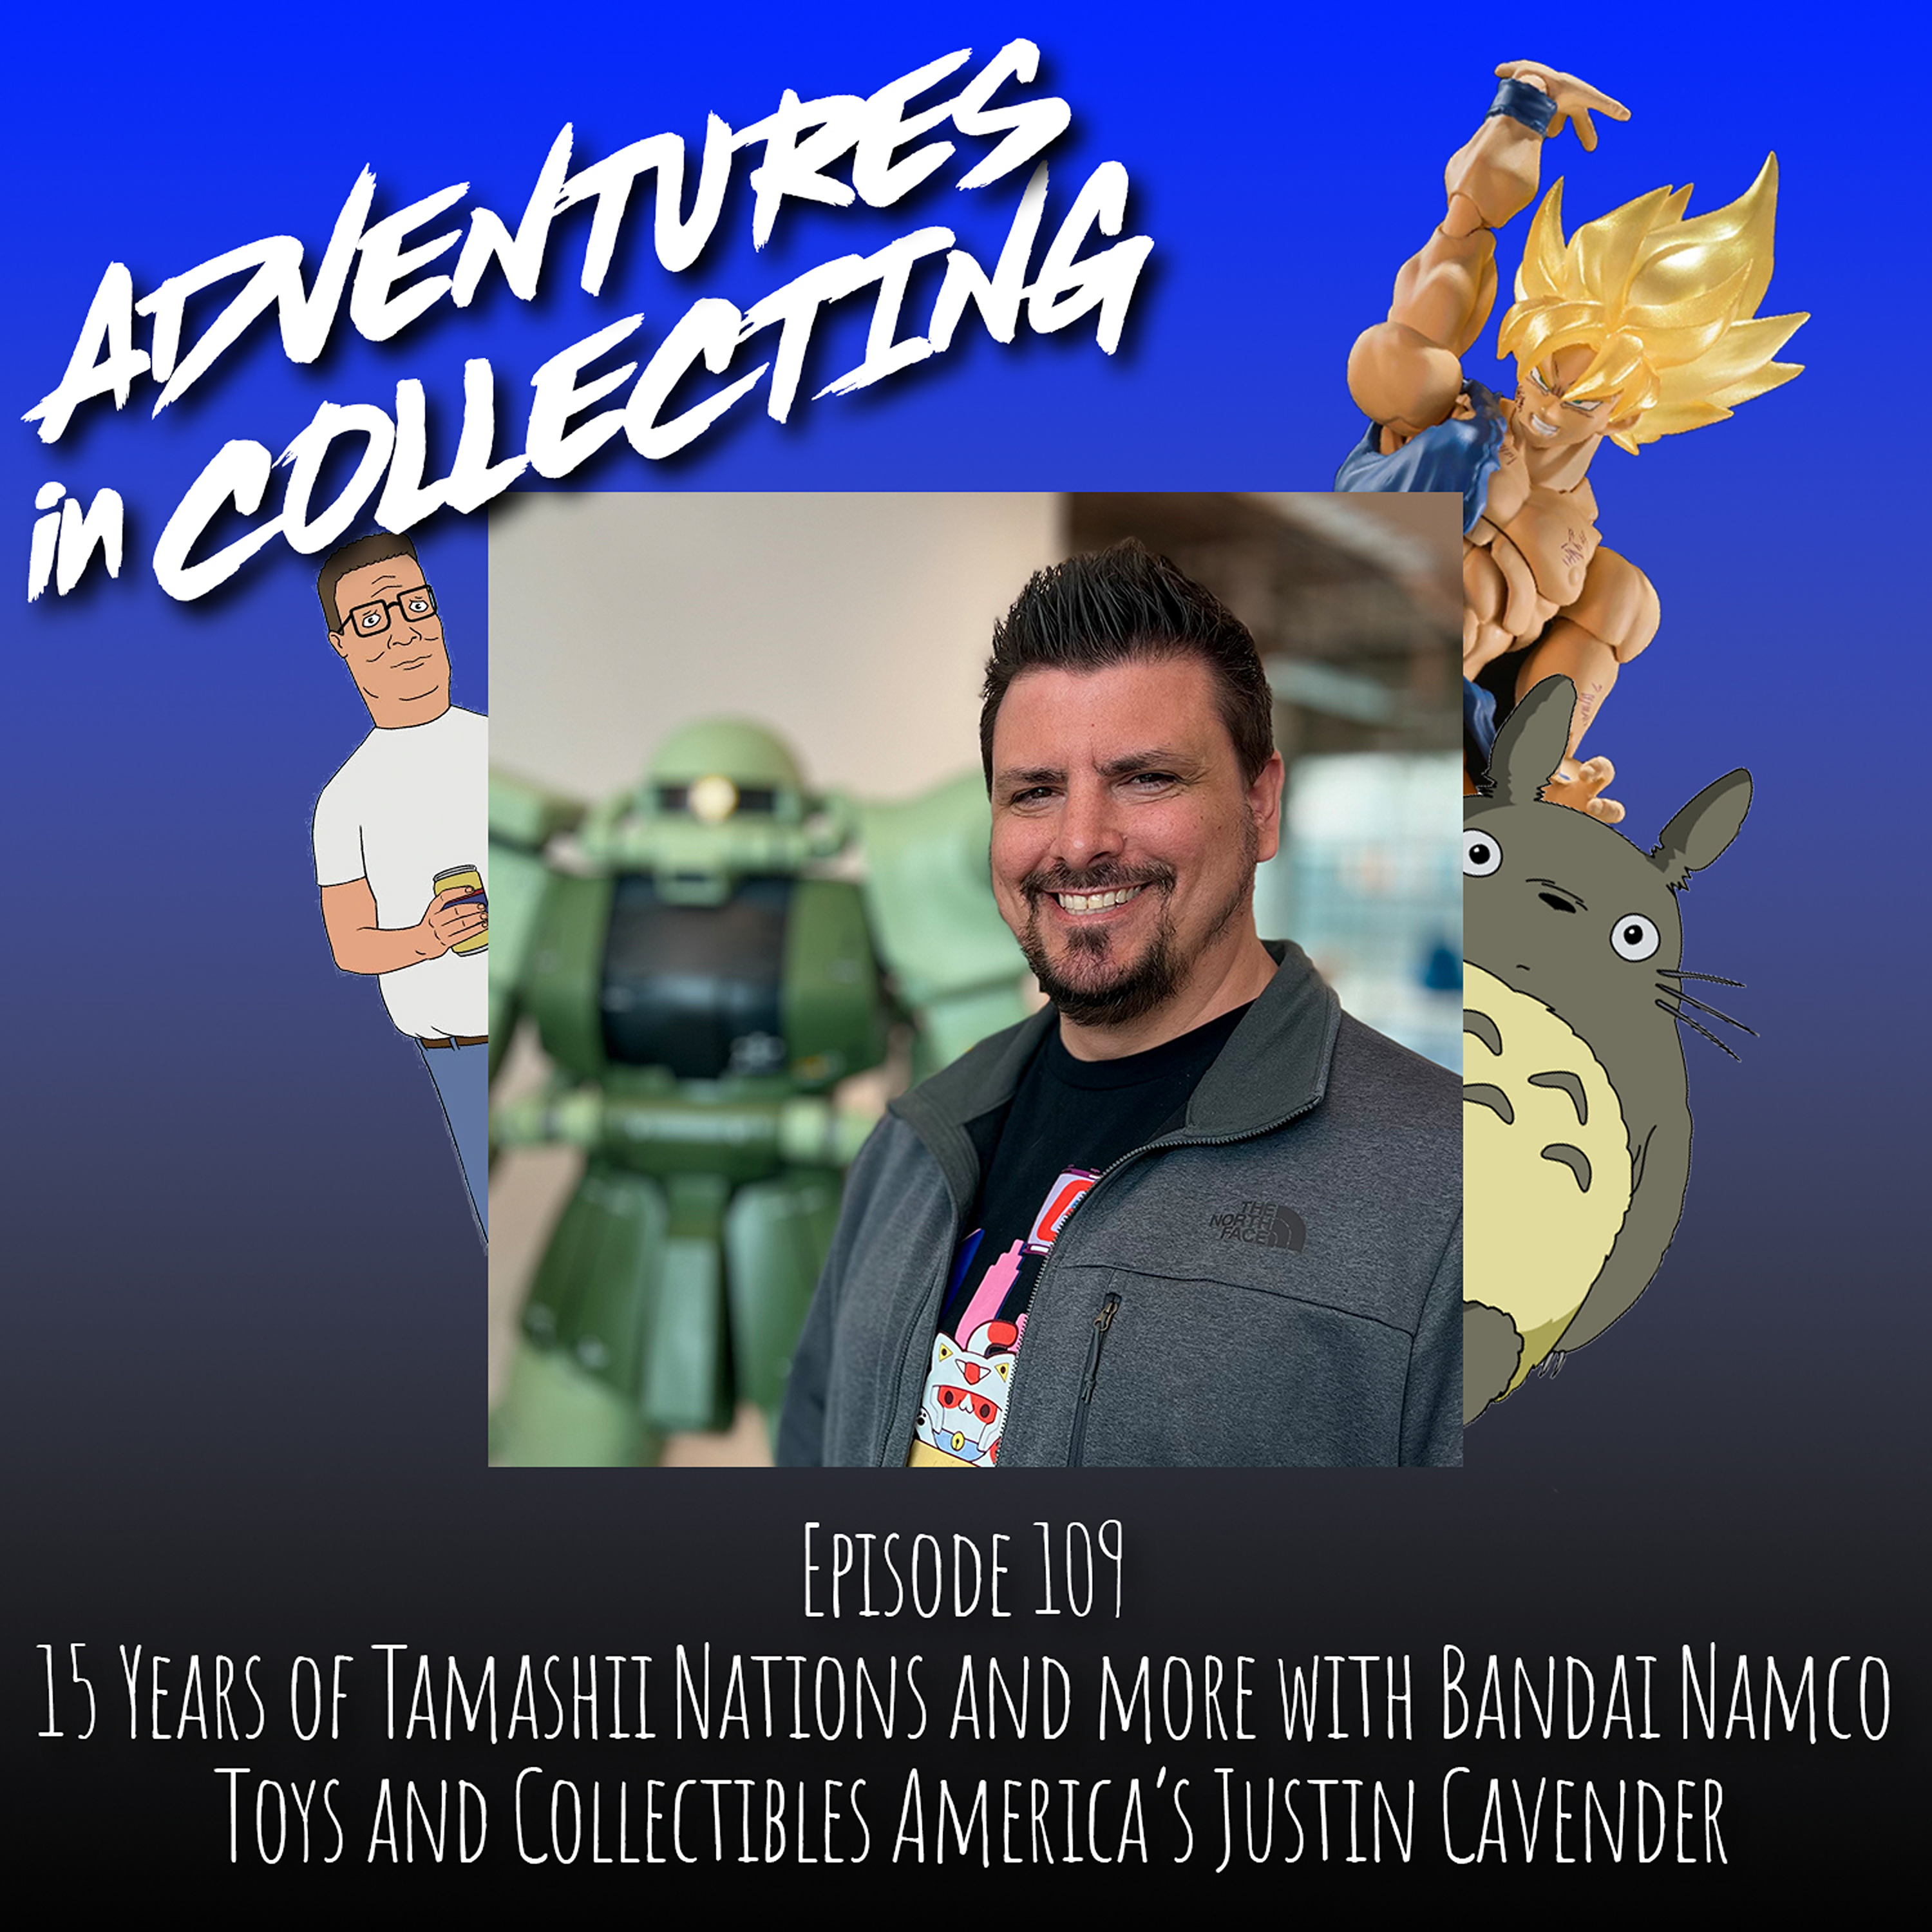 15 Years of Tamashii Nations and More with Bandai Namco Toys and Collectibles America’s Justin Cavender